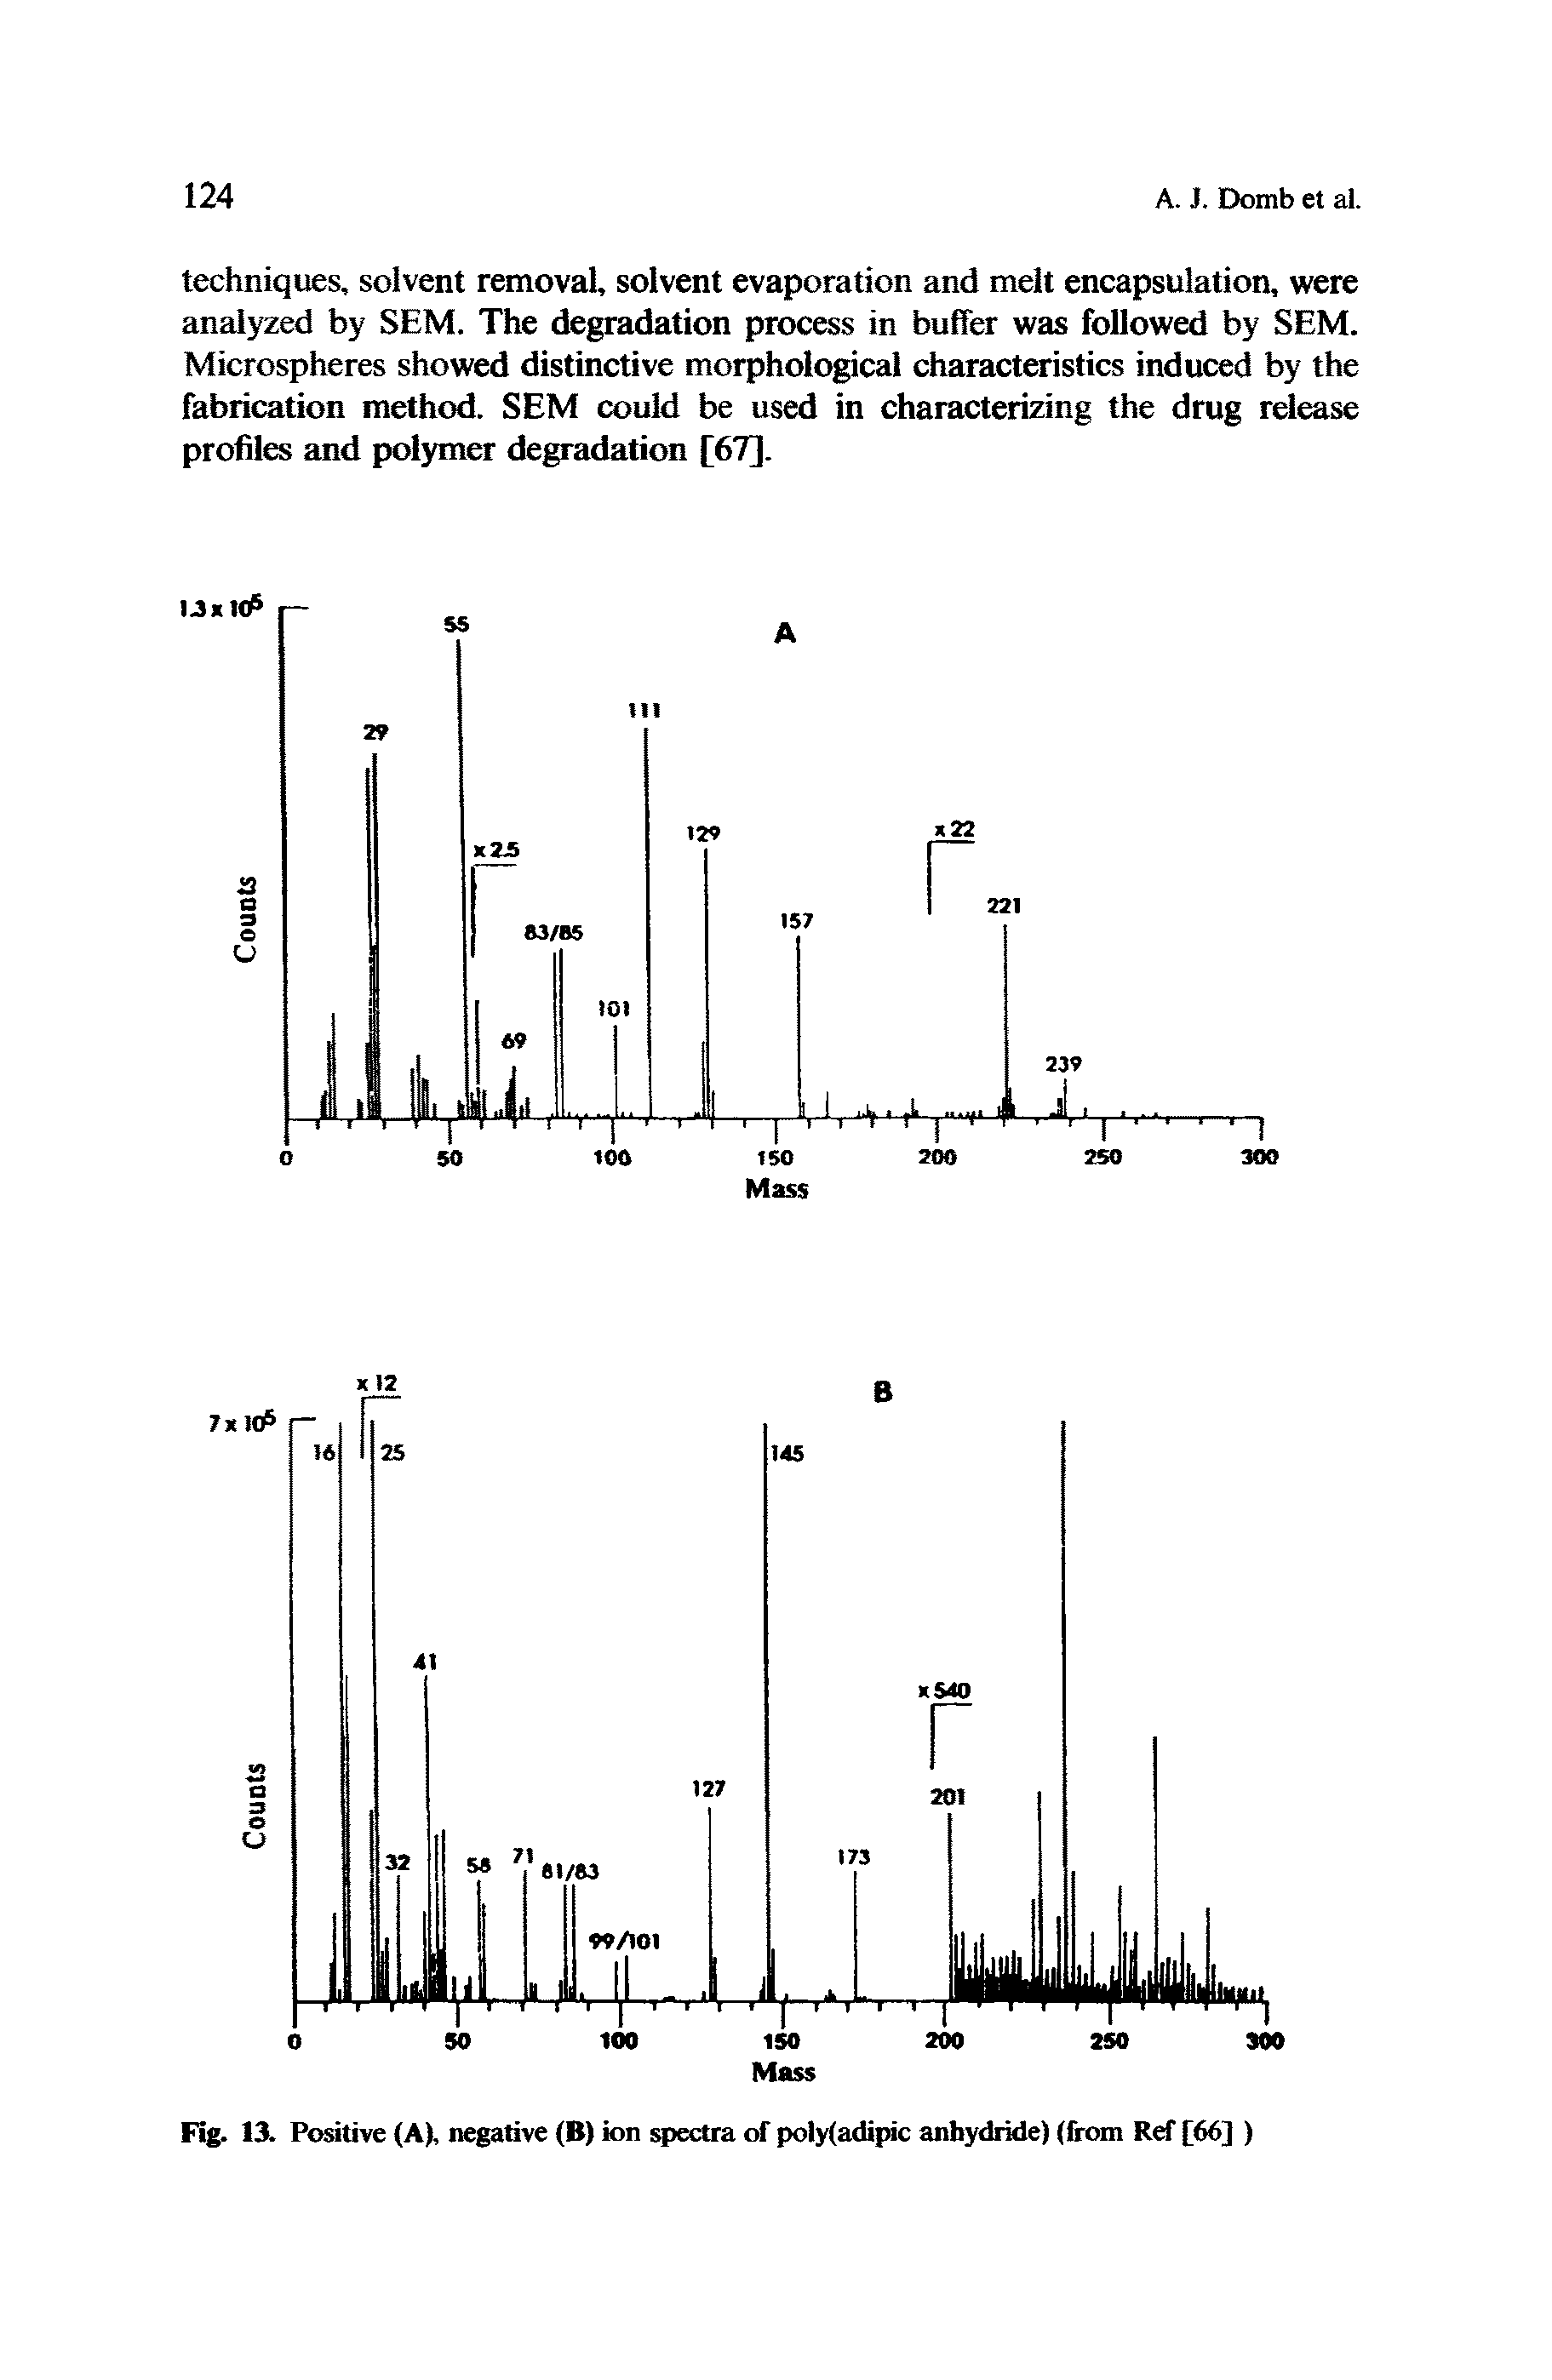 Fig. 13. Positive (A), negative (B) ion spectra of poiy(adipic anhydride) (from Ref [66] )...